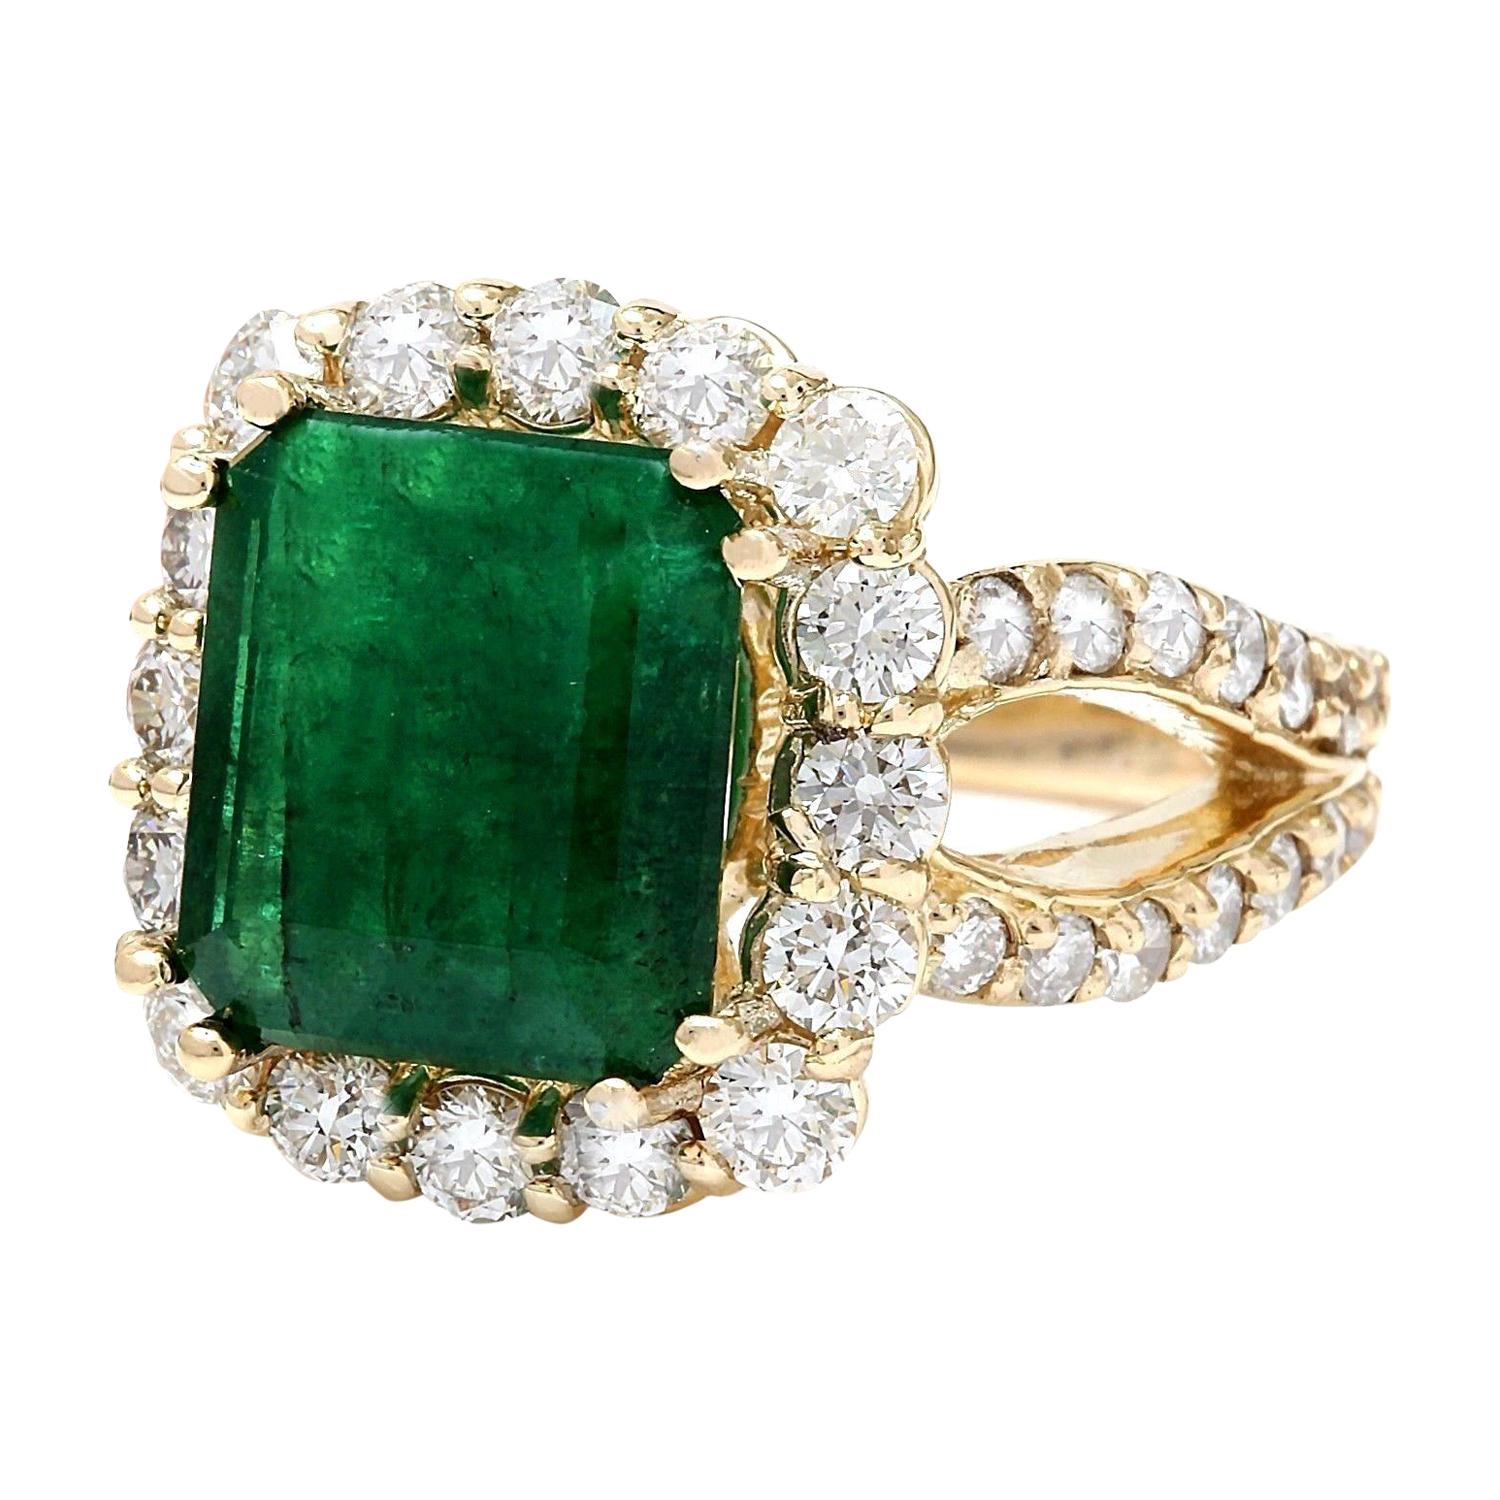 7.49 Carat  Emerald 14K Solid Yellow Gold Diamond Ring
Item Type: Ring
Item Style: Engagement
Material: 14K Yellow Gold
Mainstone: Emerald
Stone Color: Green
Stone Weight: 6.37 Carat
Stone Shape: Emerald
Stone Quantity: 1
Stone Dimensions: